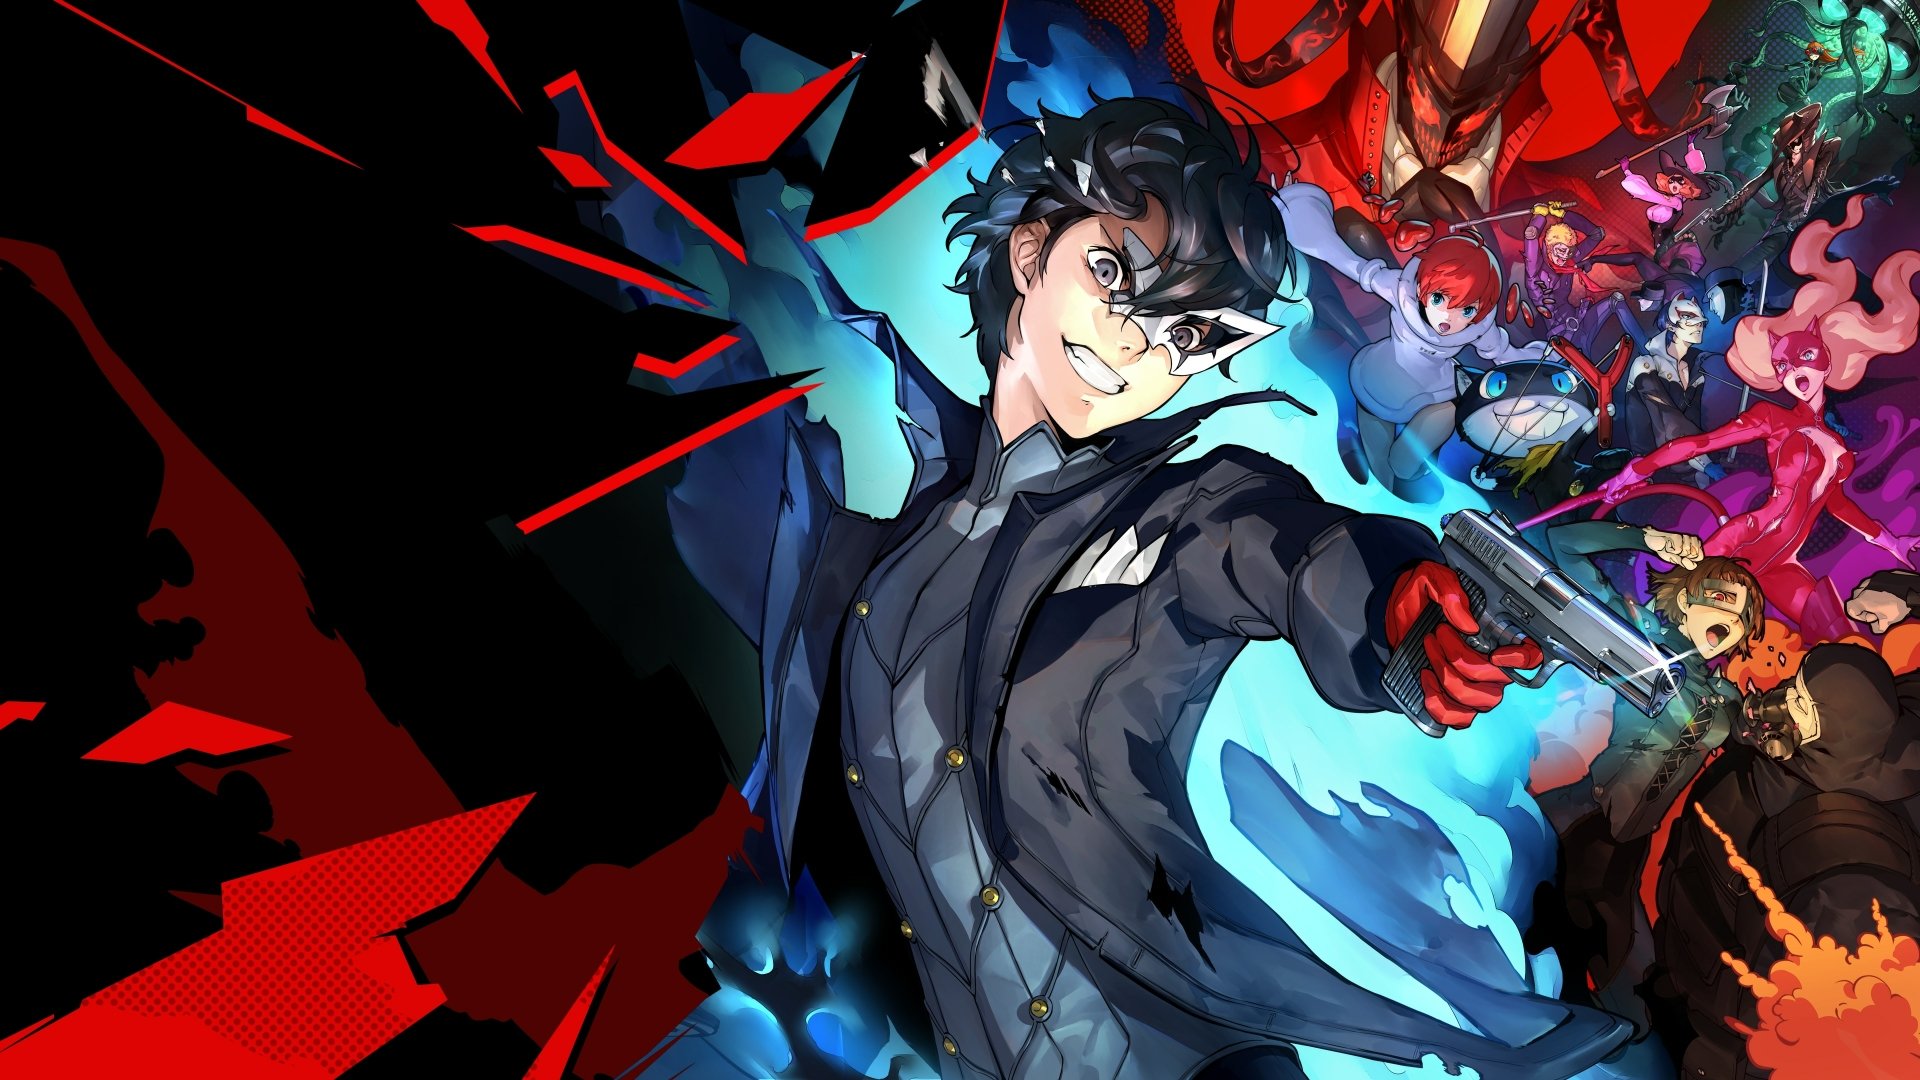 Persona 5 Strikers Hd Wallpapers And Backgrounds